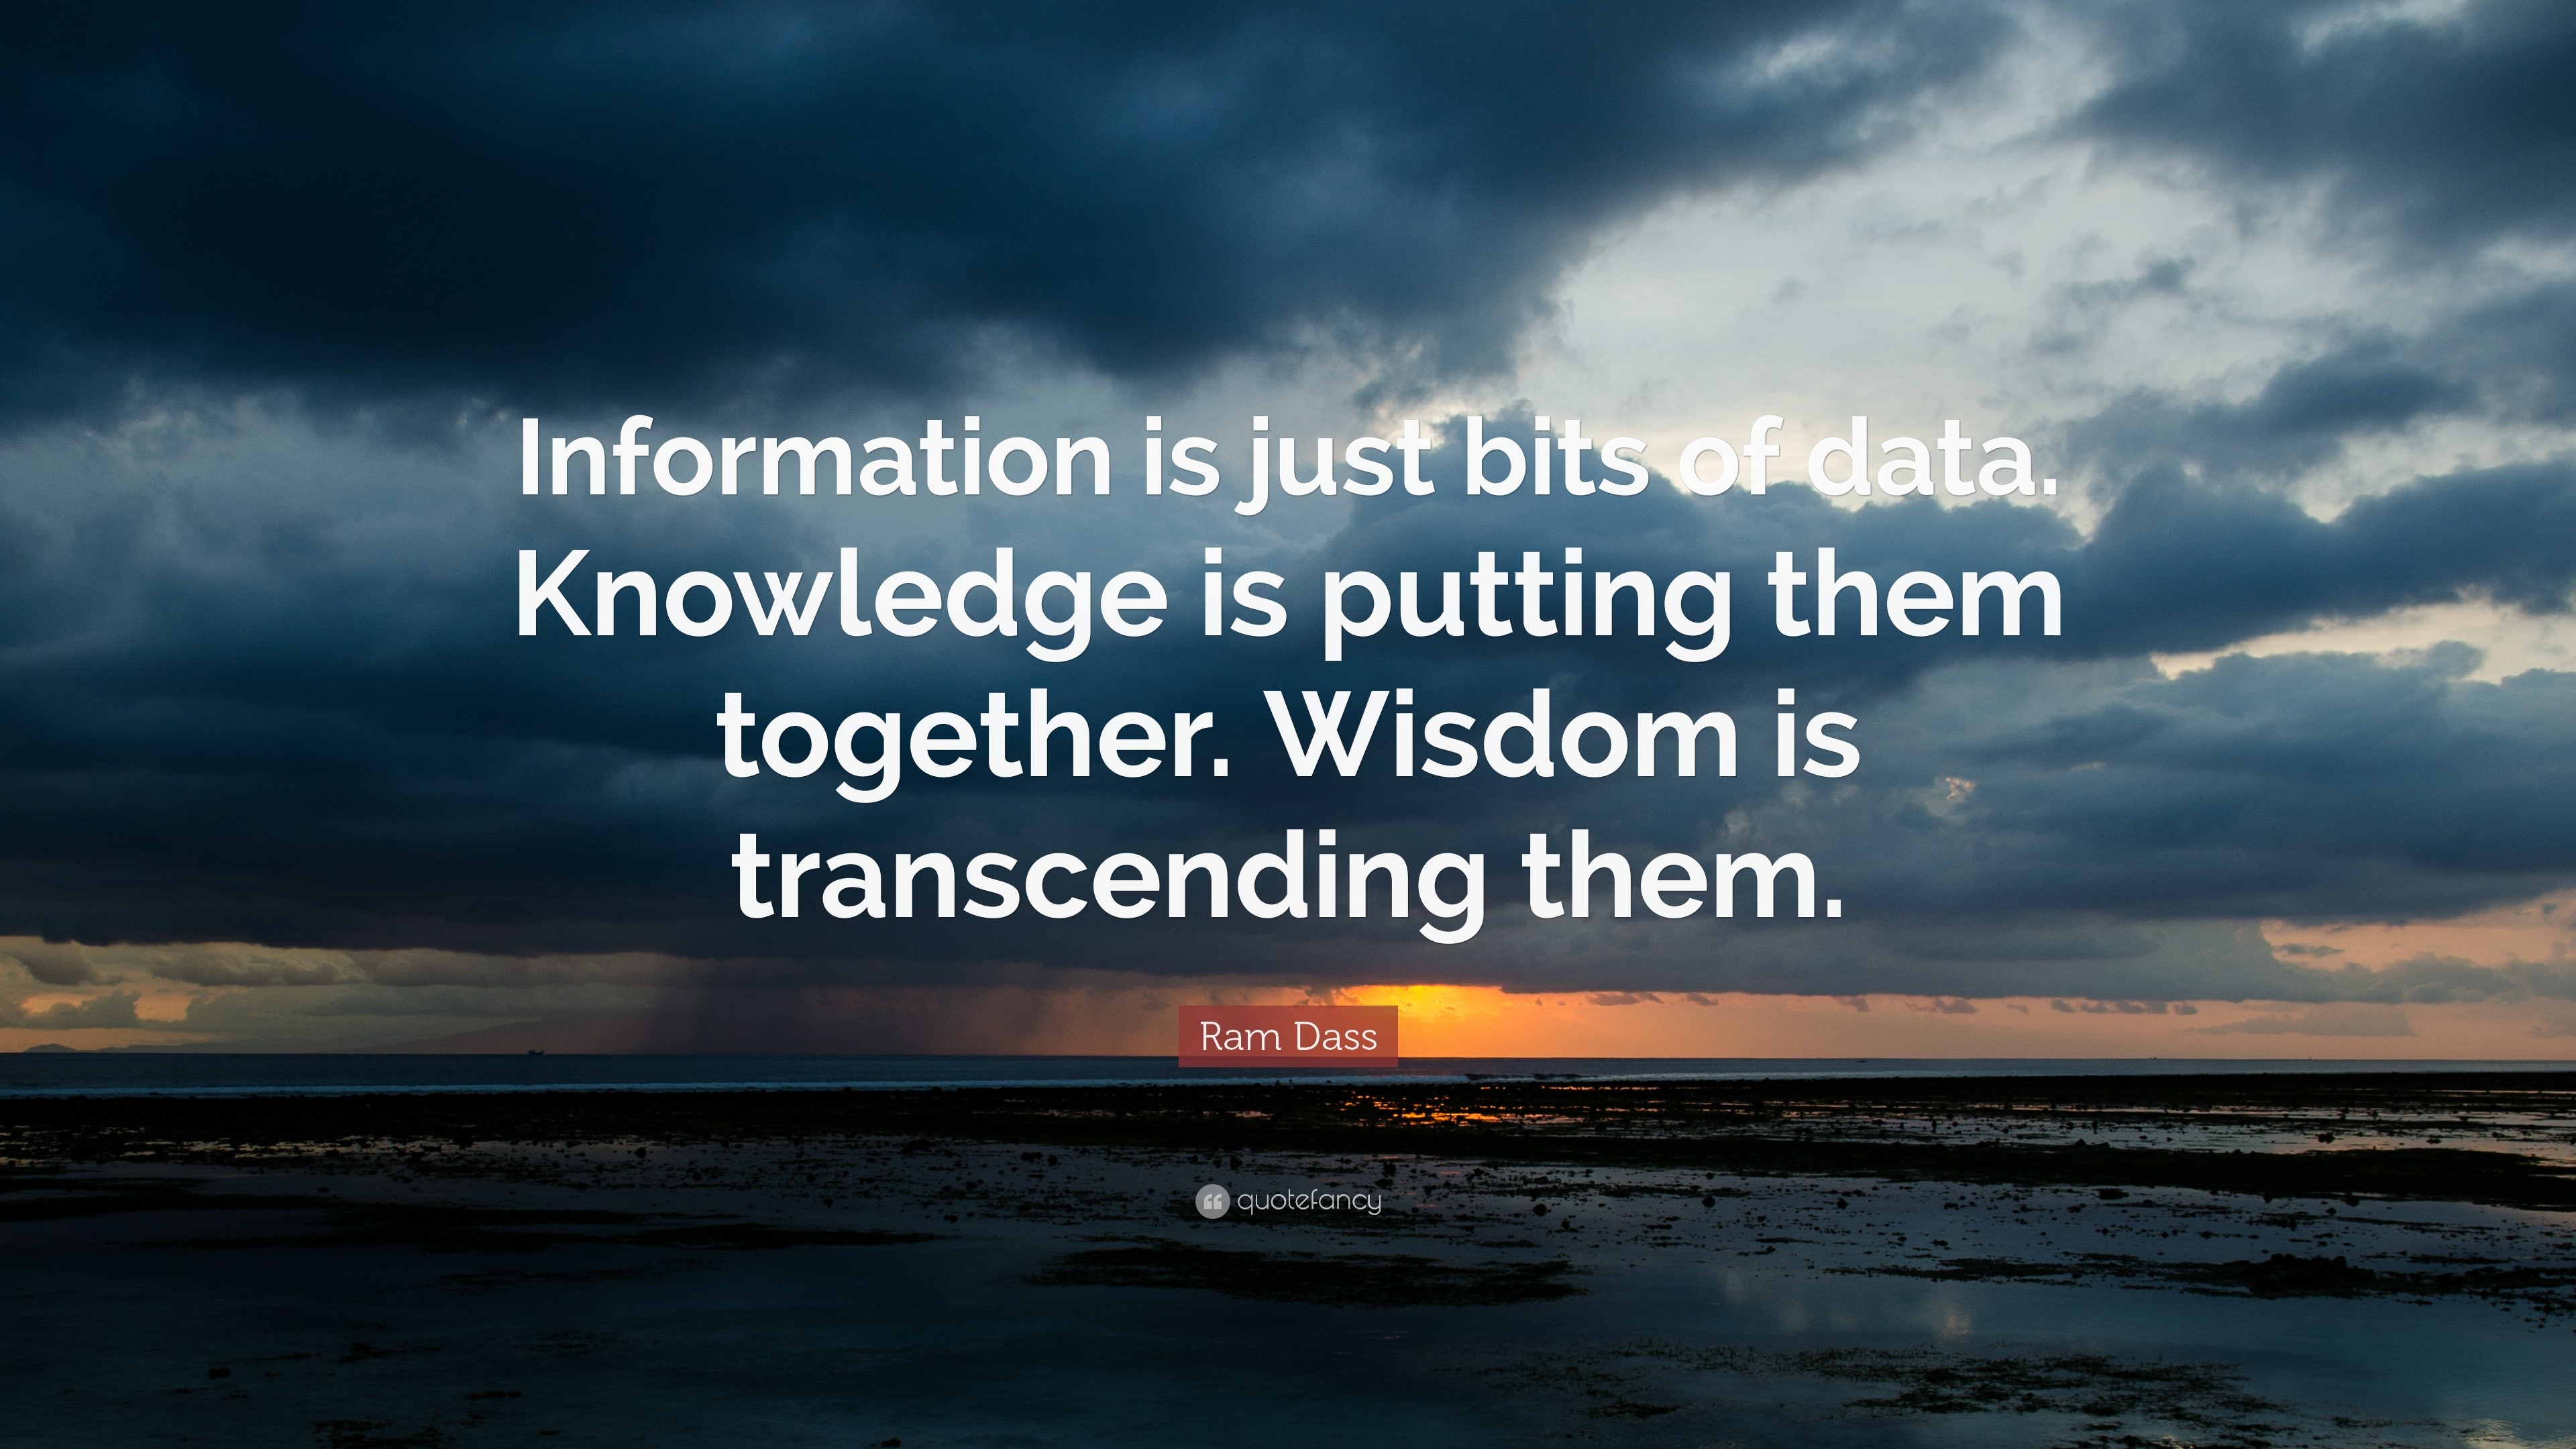 Ram Dass Quote: “Information is just bits of data. Knowledge is putting